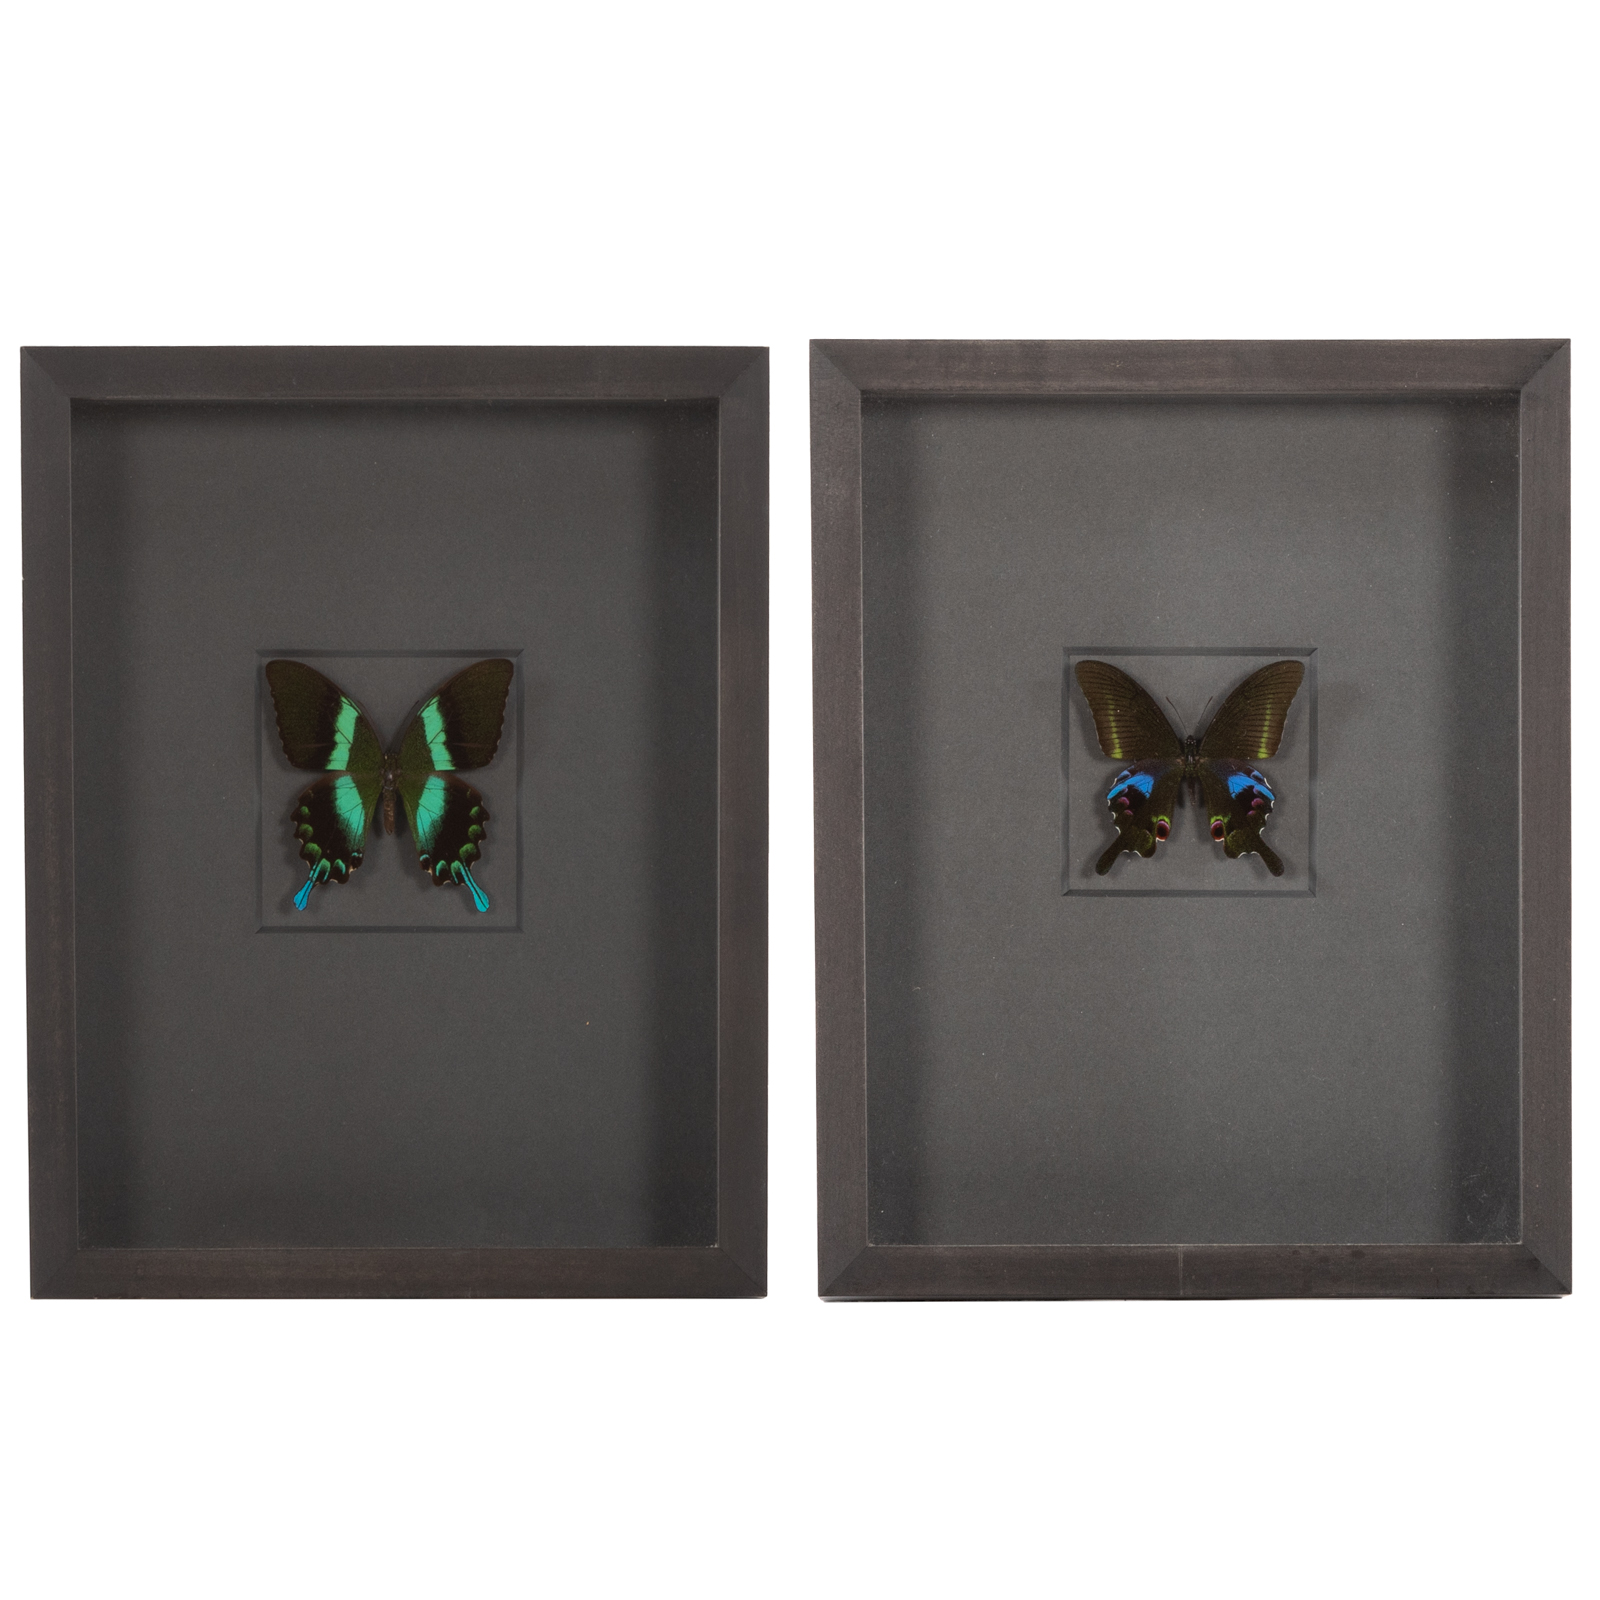 TWO FRAMED BUTTERFLIES 1.) "Lime